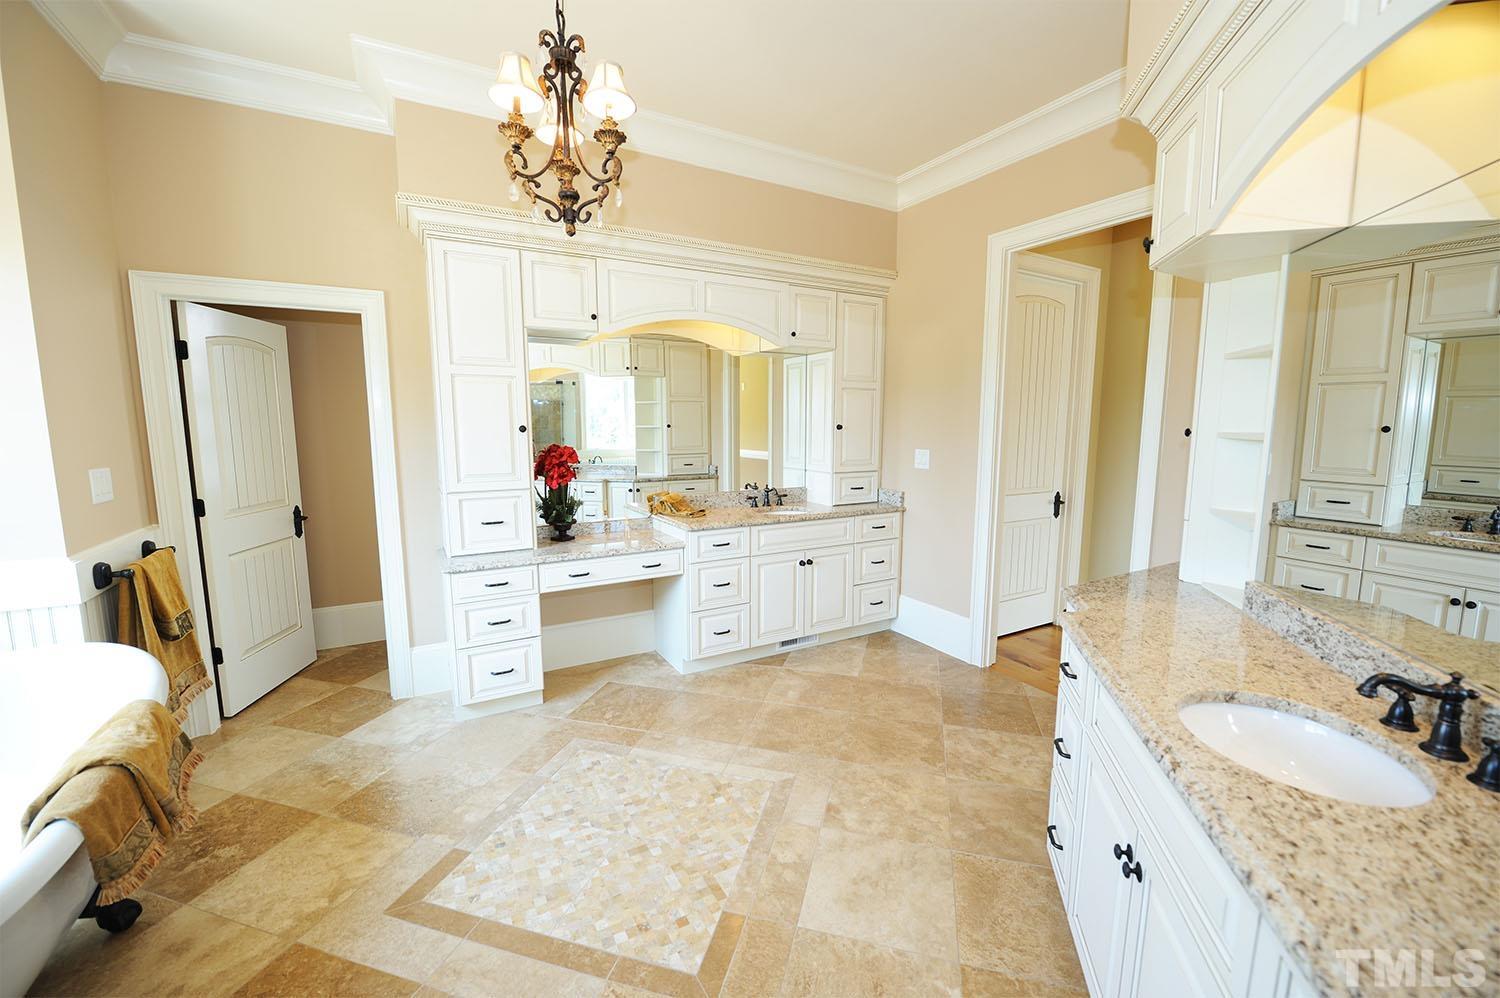 Another view of the luxury bathroom. Each of the vanities has storage above, below and on the sides.